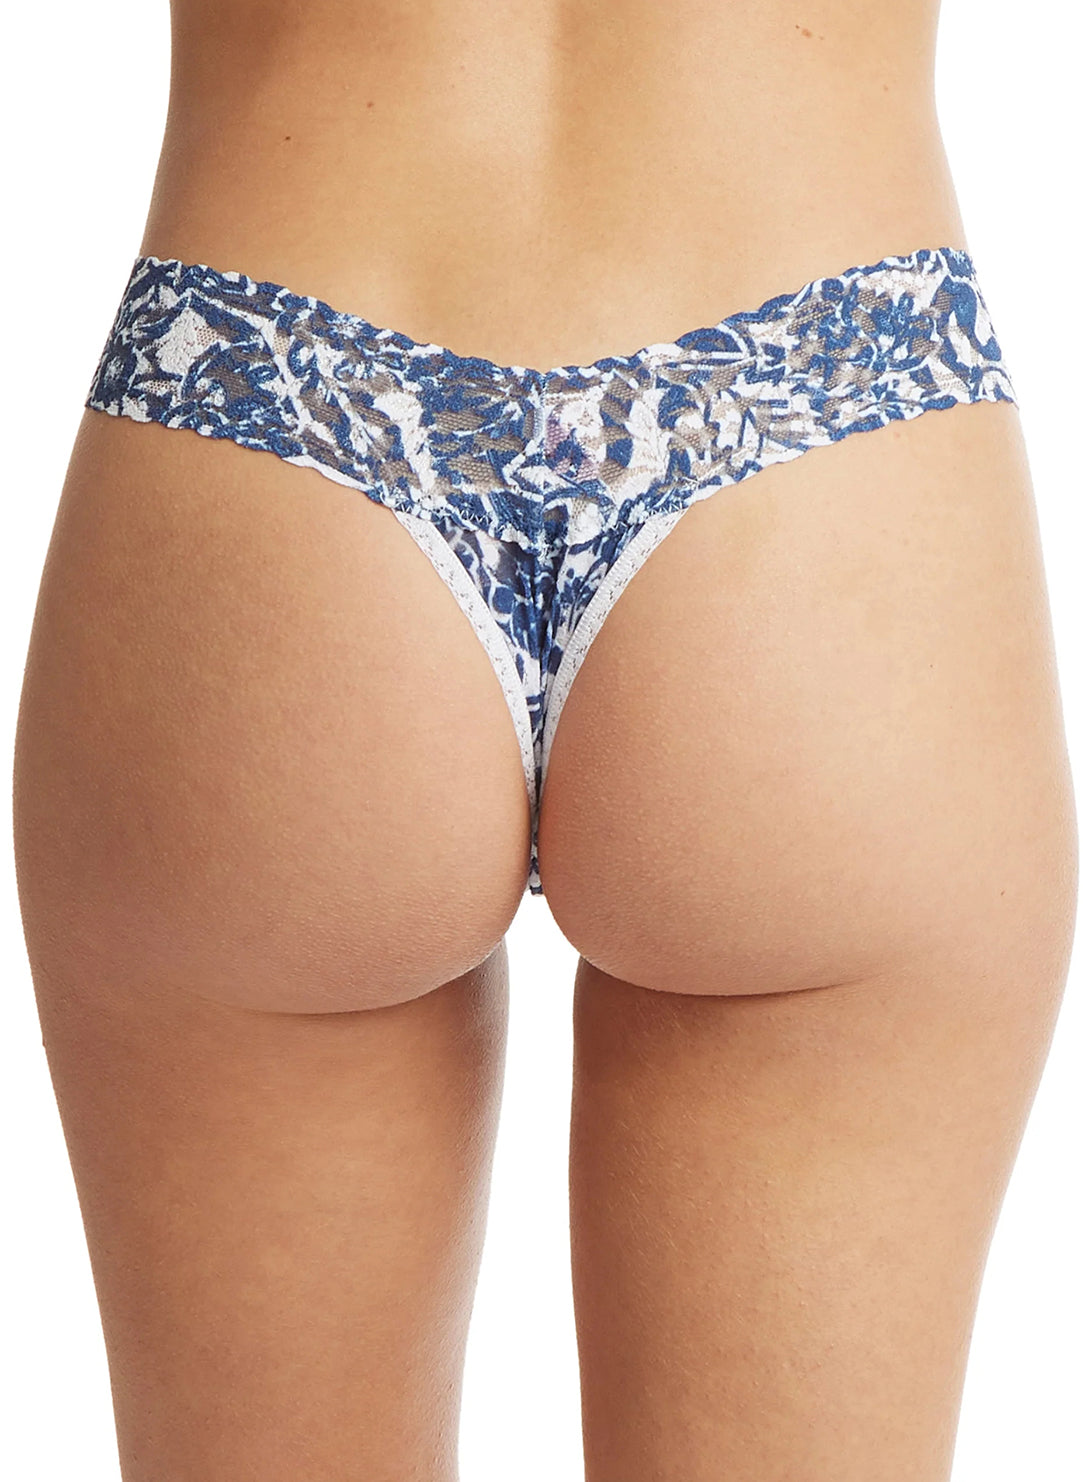 Signature Lace Sketchbook Floral Printed Low Rise Thong